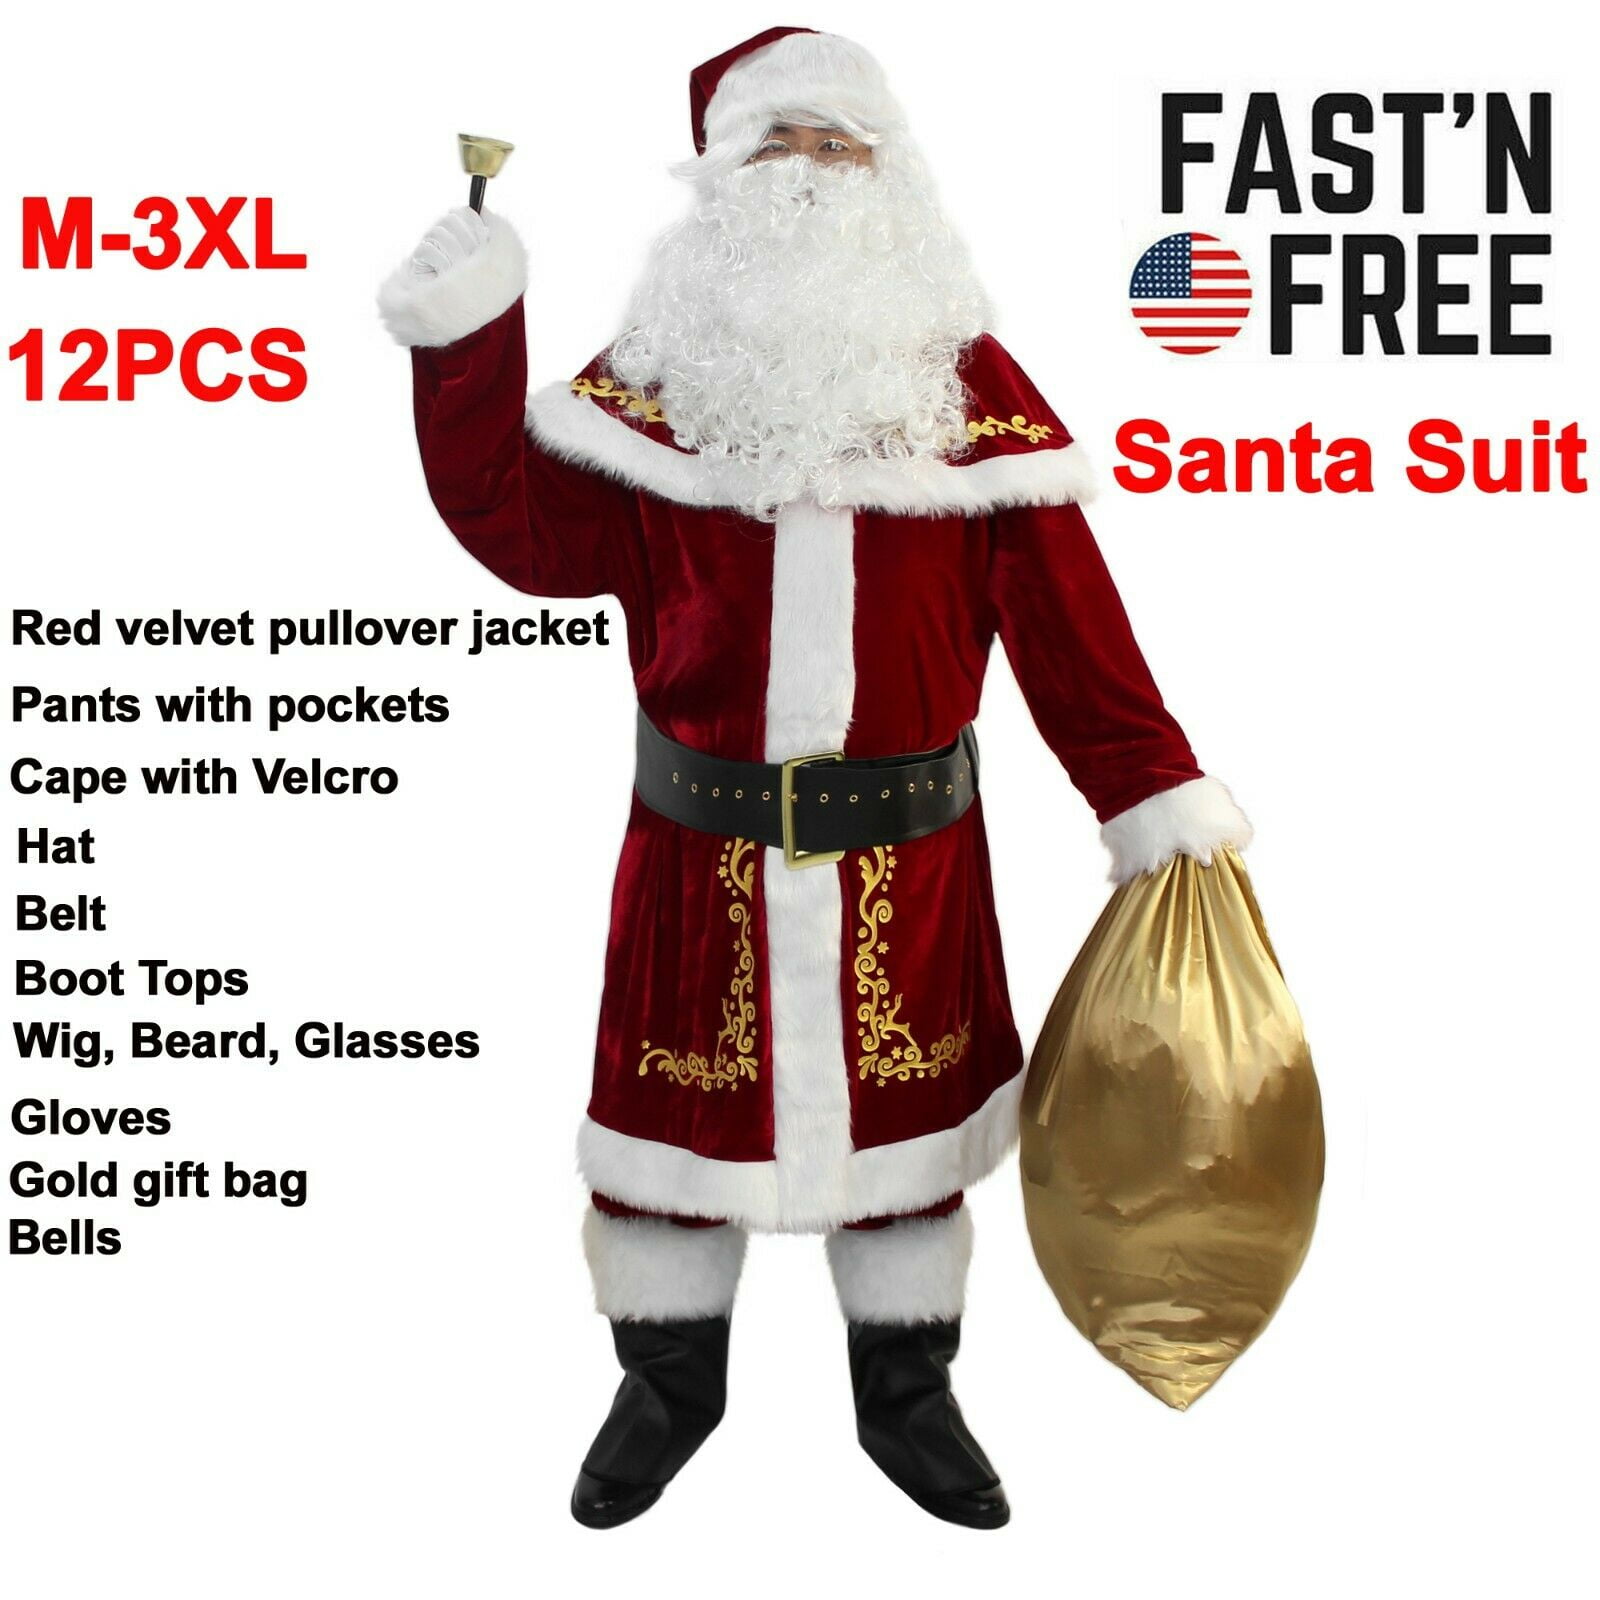 Mr Santa Claus Costume Christmas Thermal Velvet Santa Outfit Holiday Party Funny Santa Cosplay Comfy Suit with Beard 